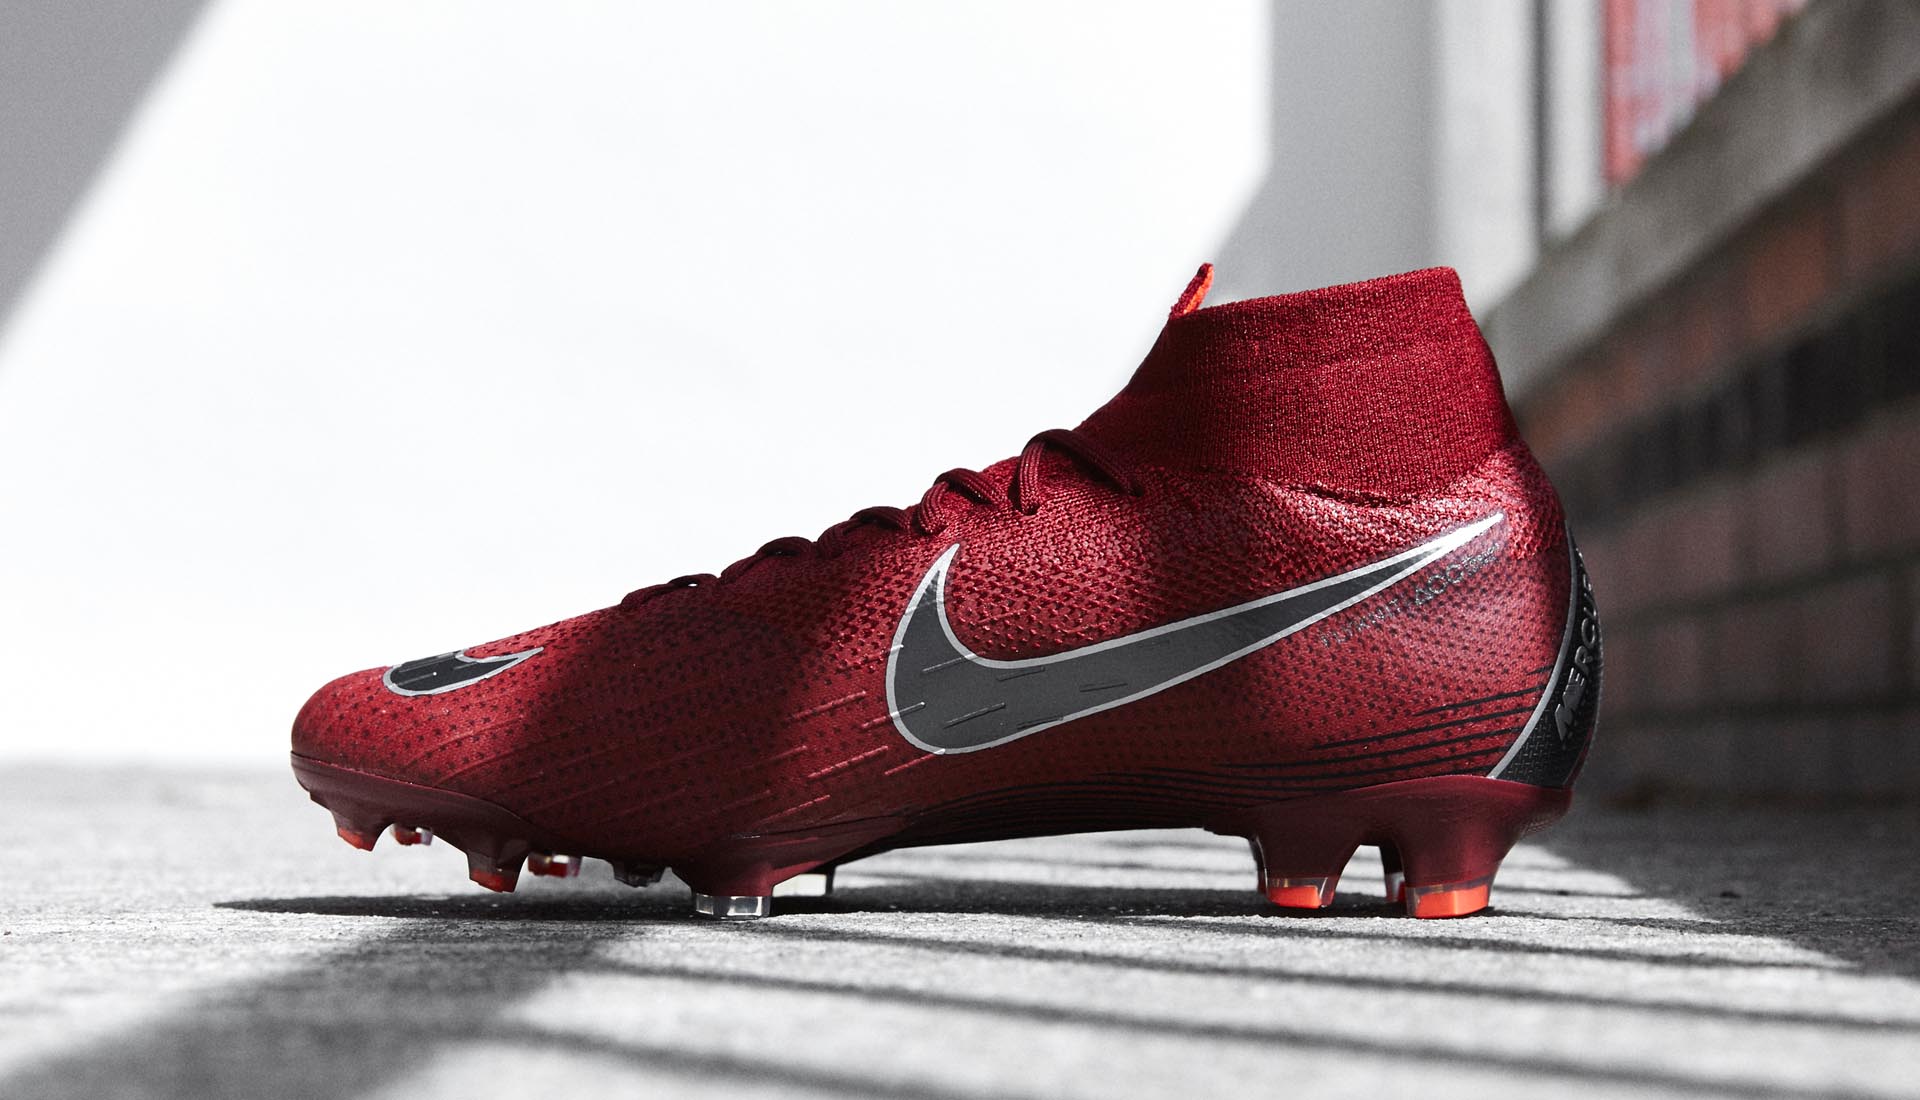 Nike Launch The Superfly 360 "Rising Fire" - SoccerBible